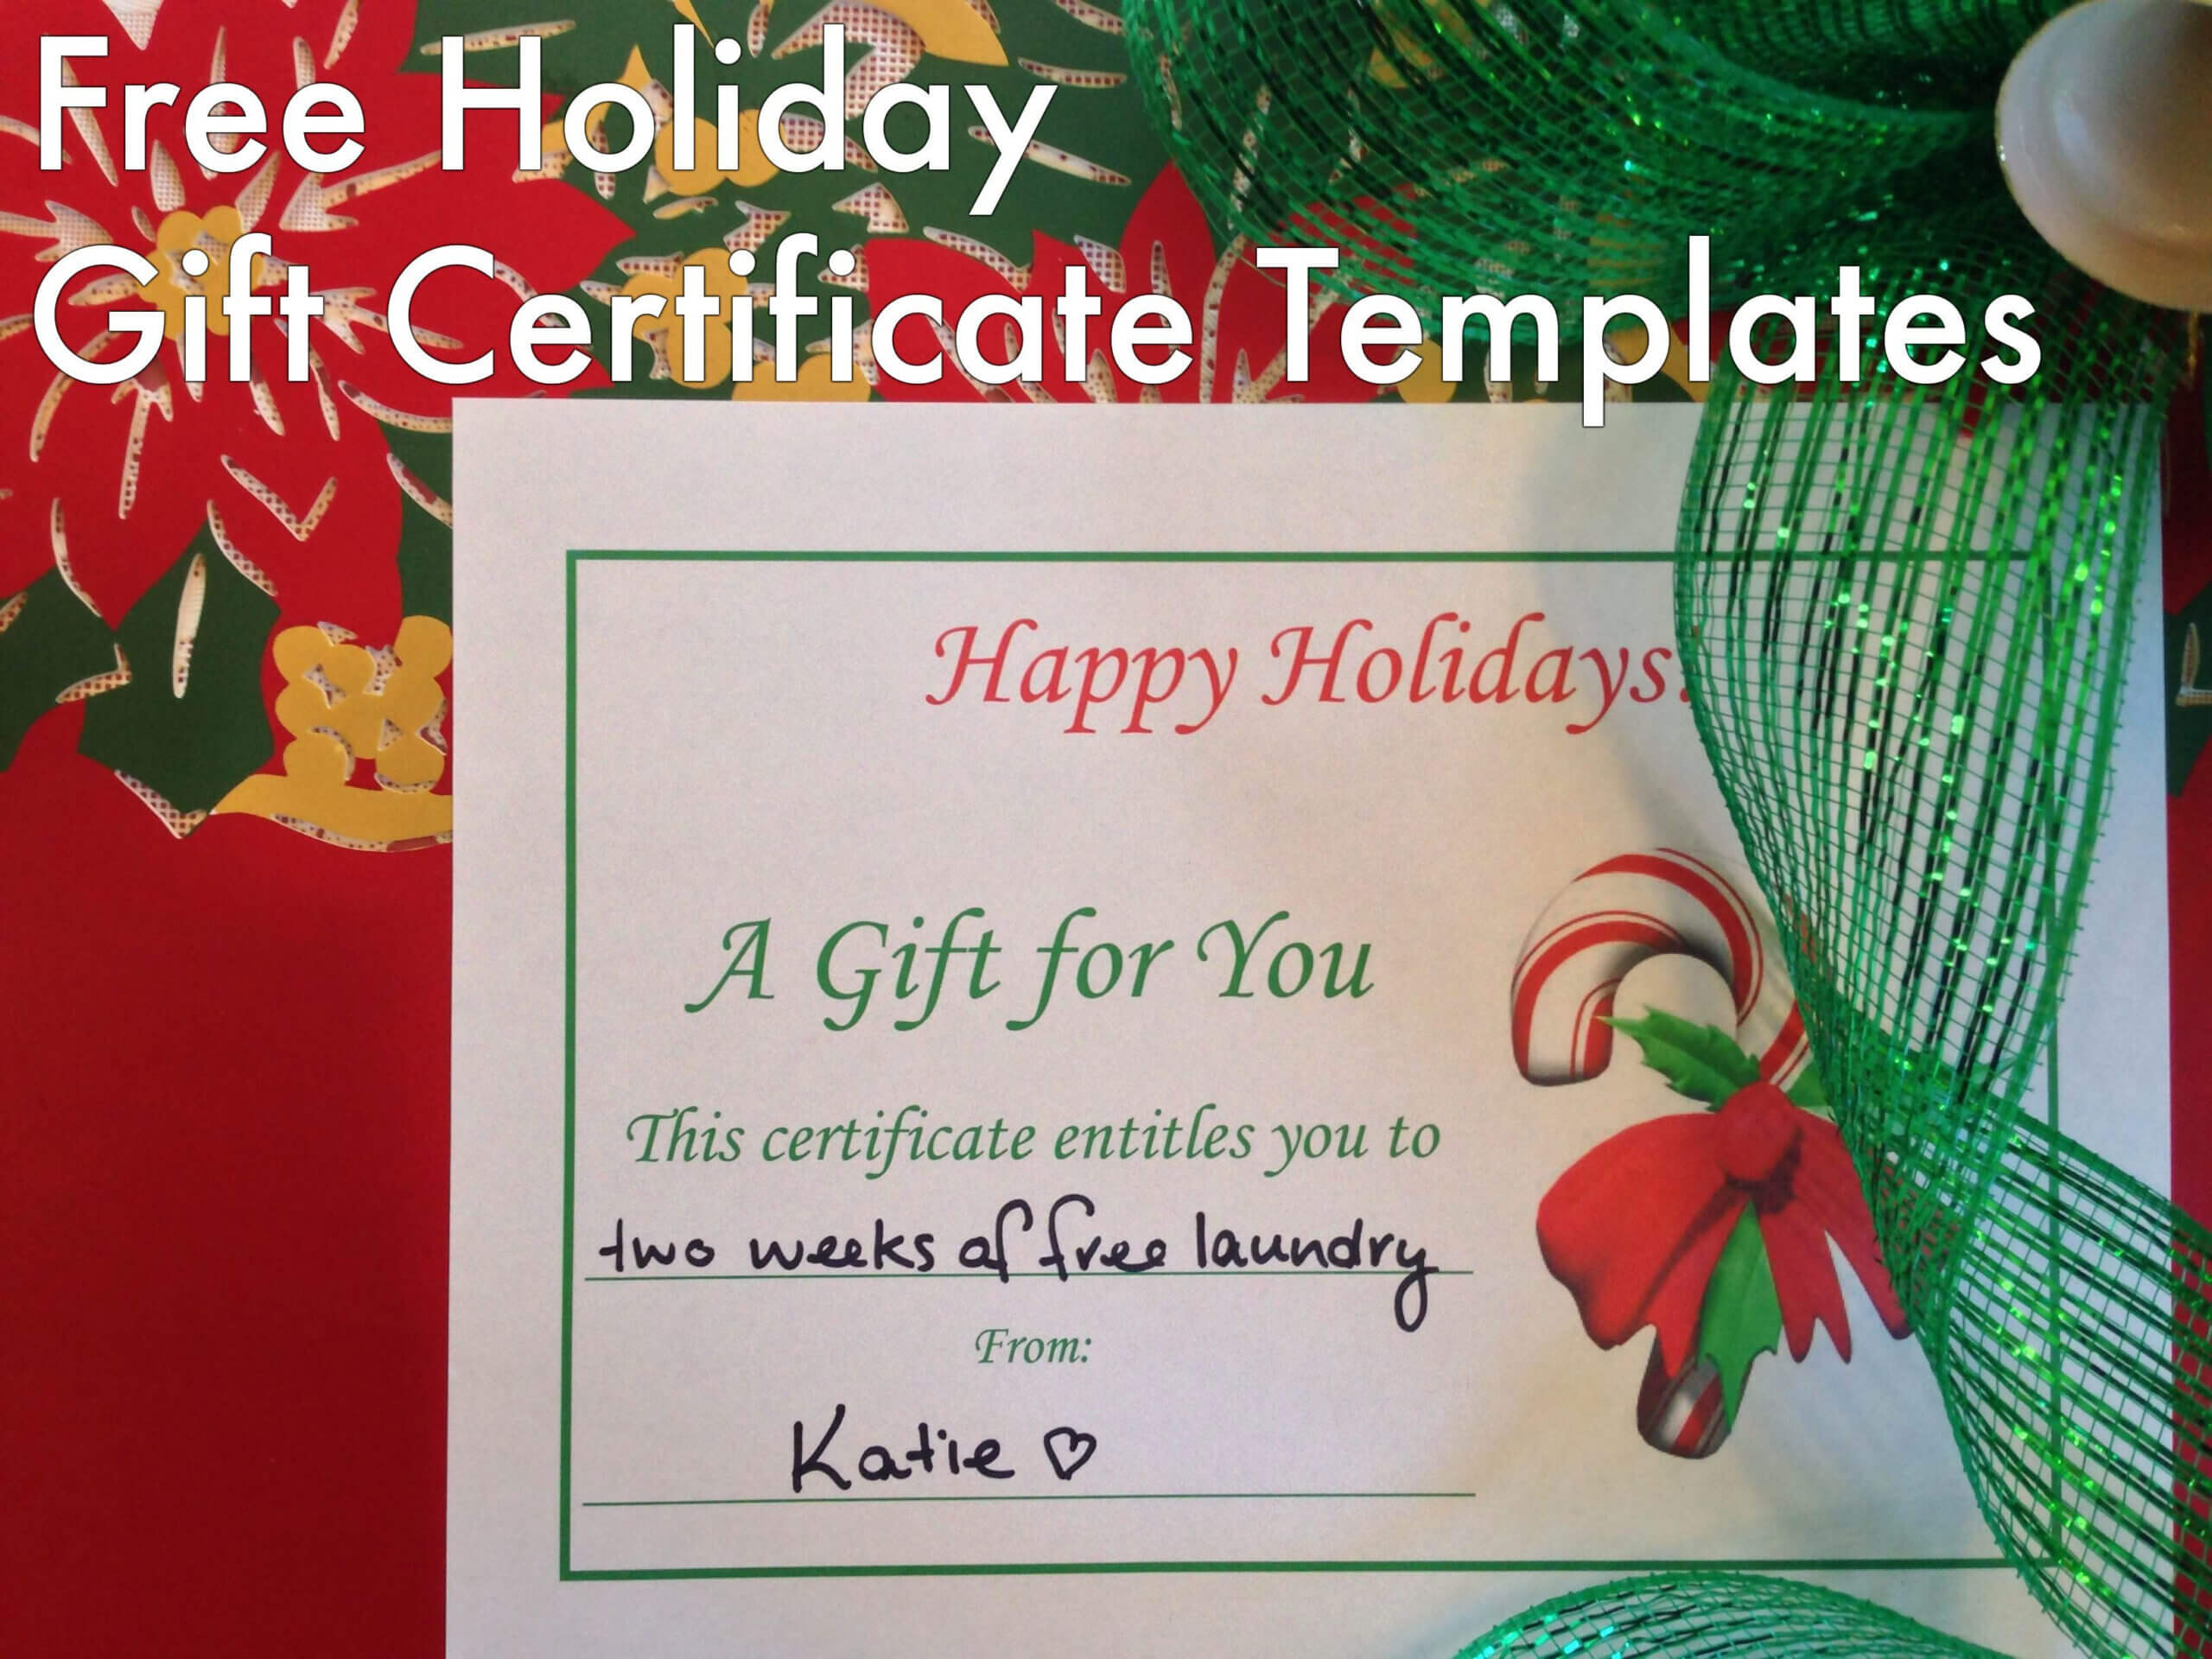 Free Holiday Gift Certificates Templates To Print | Tis The Pertaining To Homemade Christmas Gift Certificates Templates